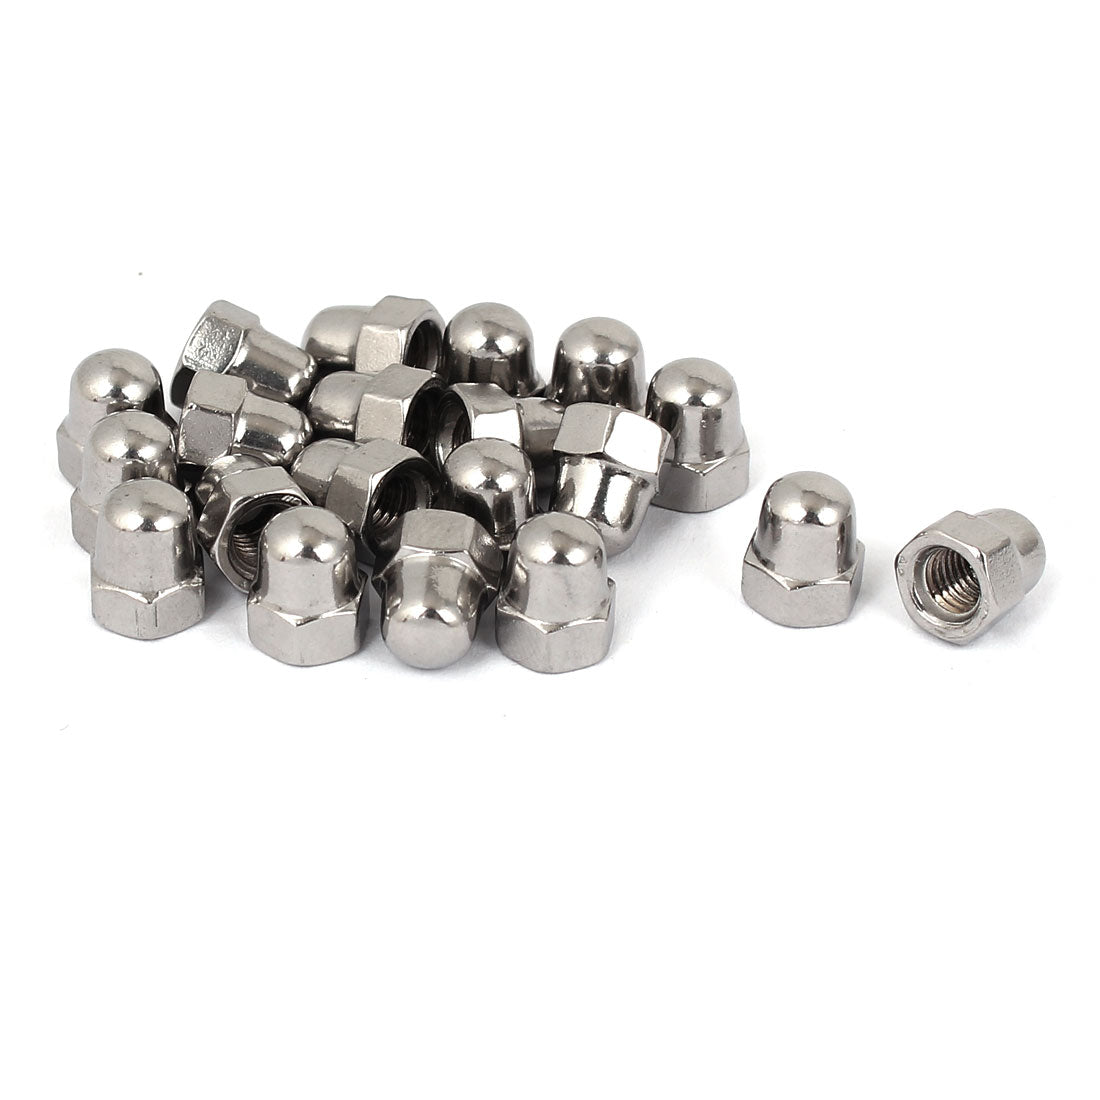 uxcell Uxcell M5 Thread Dia Dome Head 304 Stainless Steel Cap Acorn Hex Nuts 20pcs